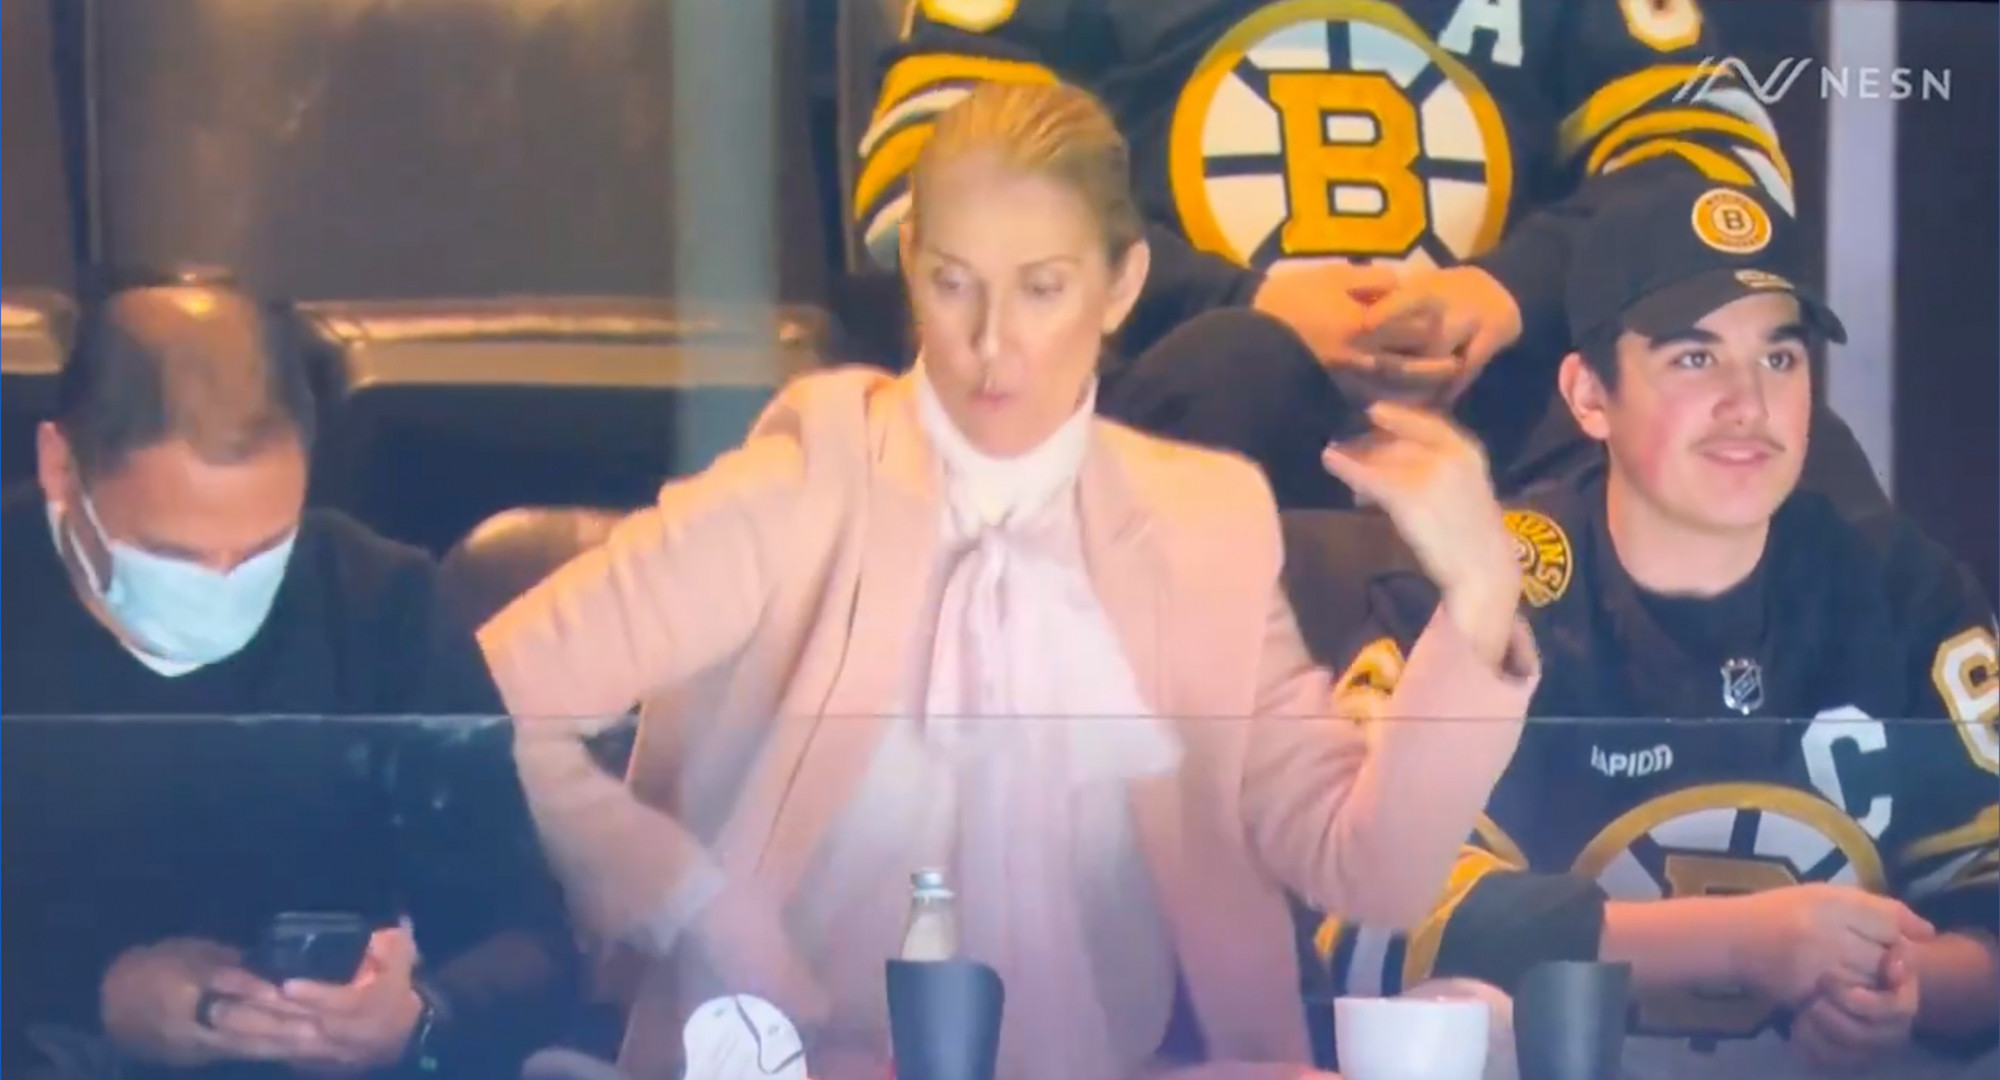 Celine Dion Swaps Mic for Air Guitar, Delights Fans at Boston Bruins Game